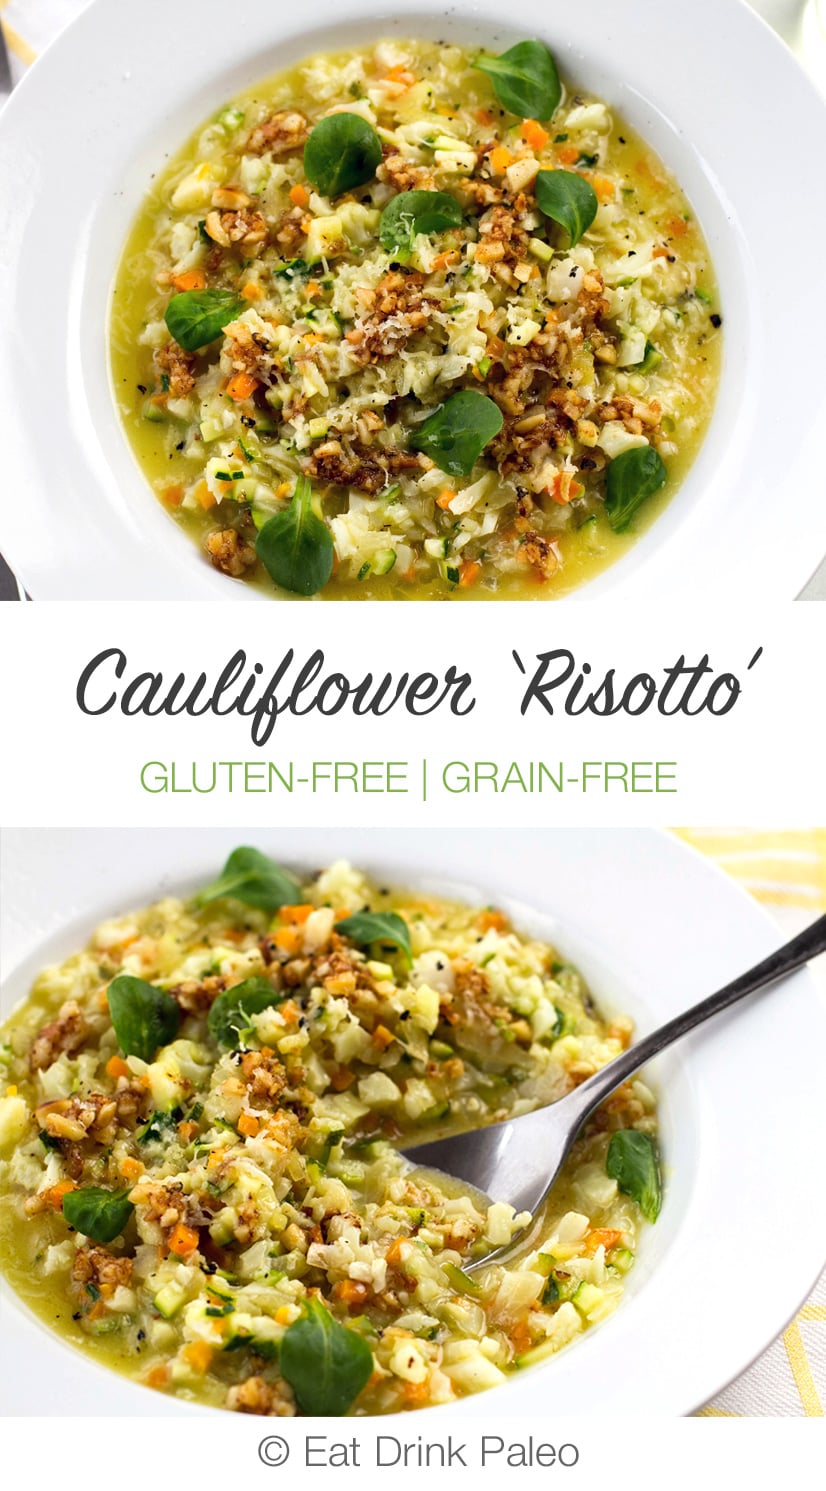 Cauliflower 'Risotto' With Burnt Butter & Macadamia Nuts (Primal, Grain-Free, Gluten-Free, Low-Carb)